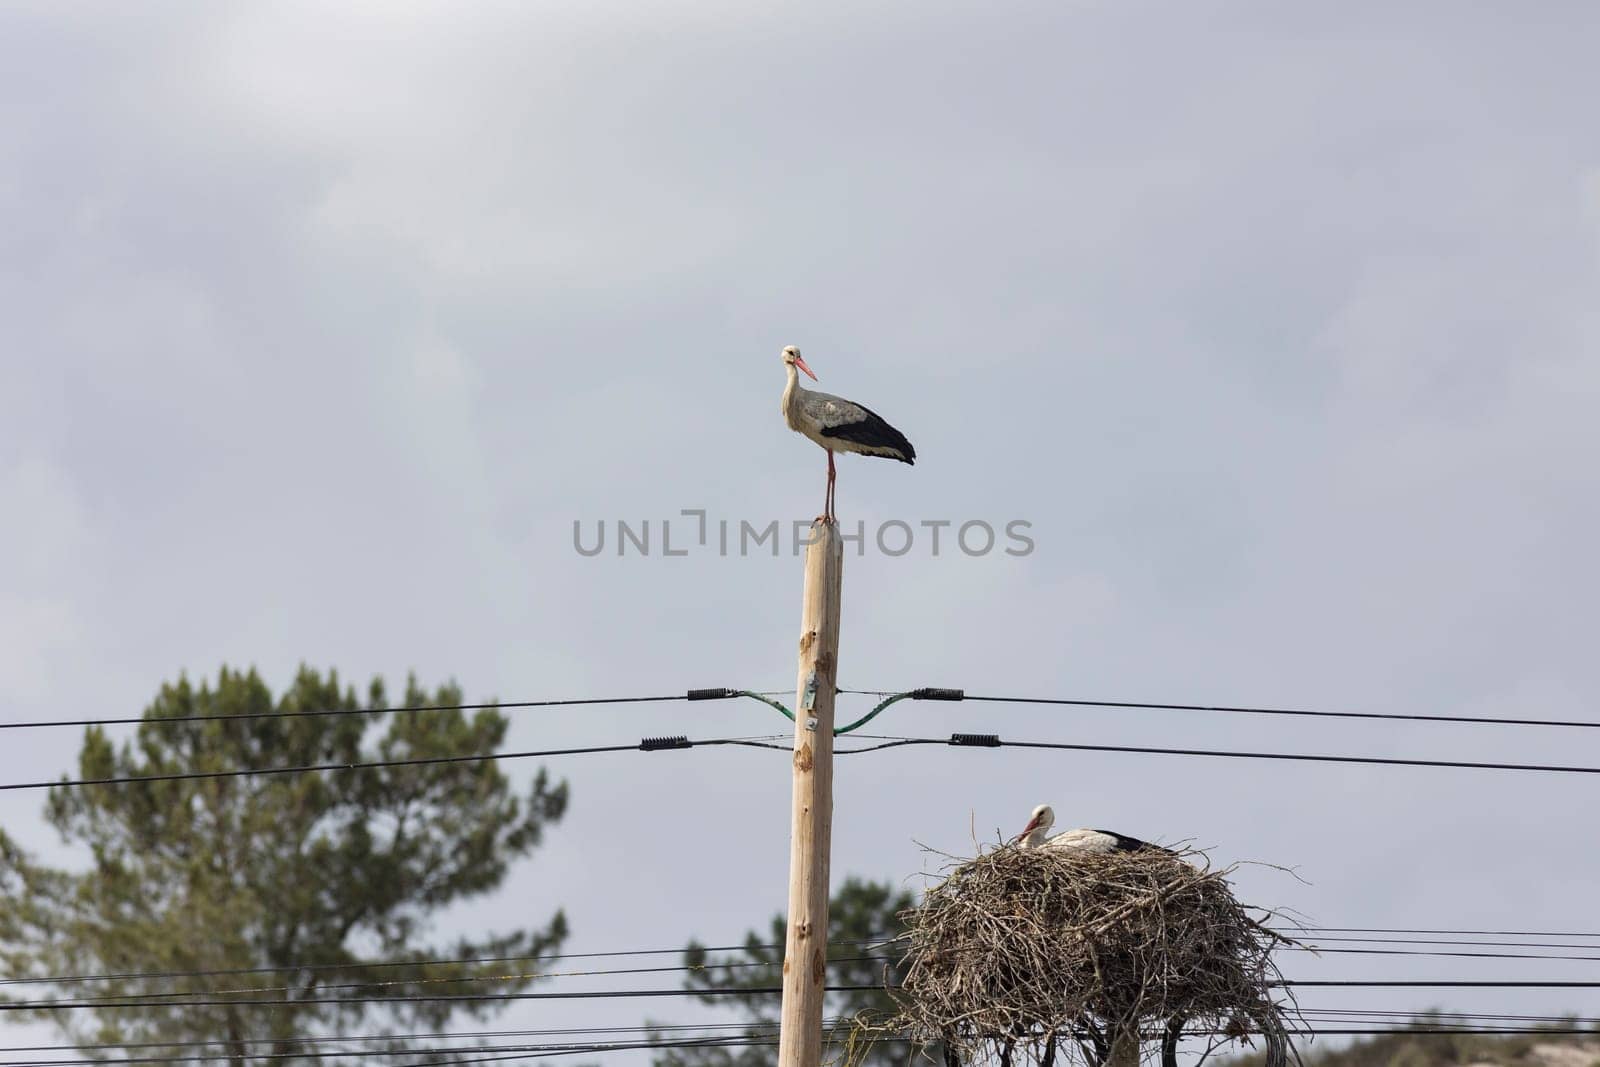 A storks - bird is perched on a pole next to a nest - telephoto